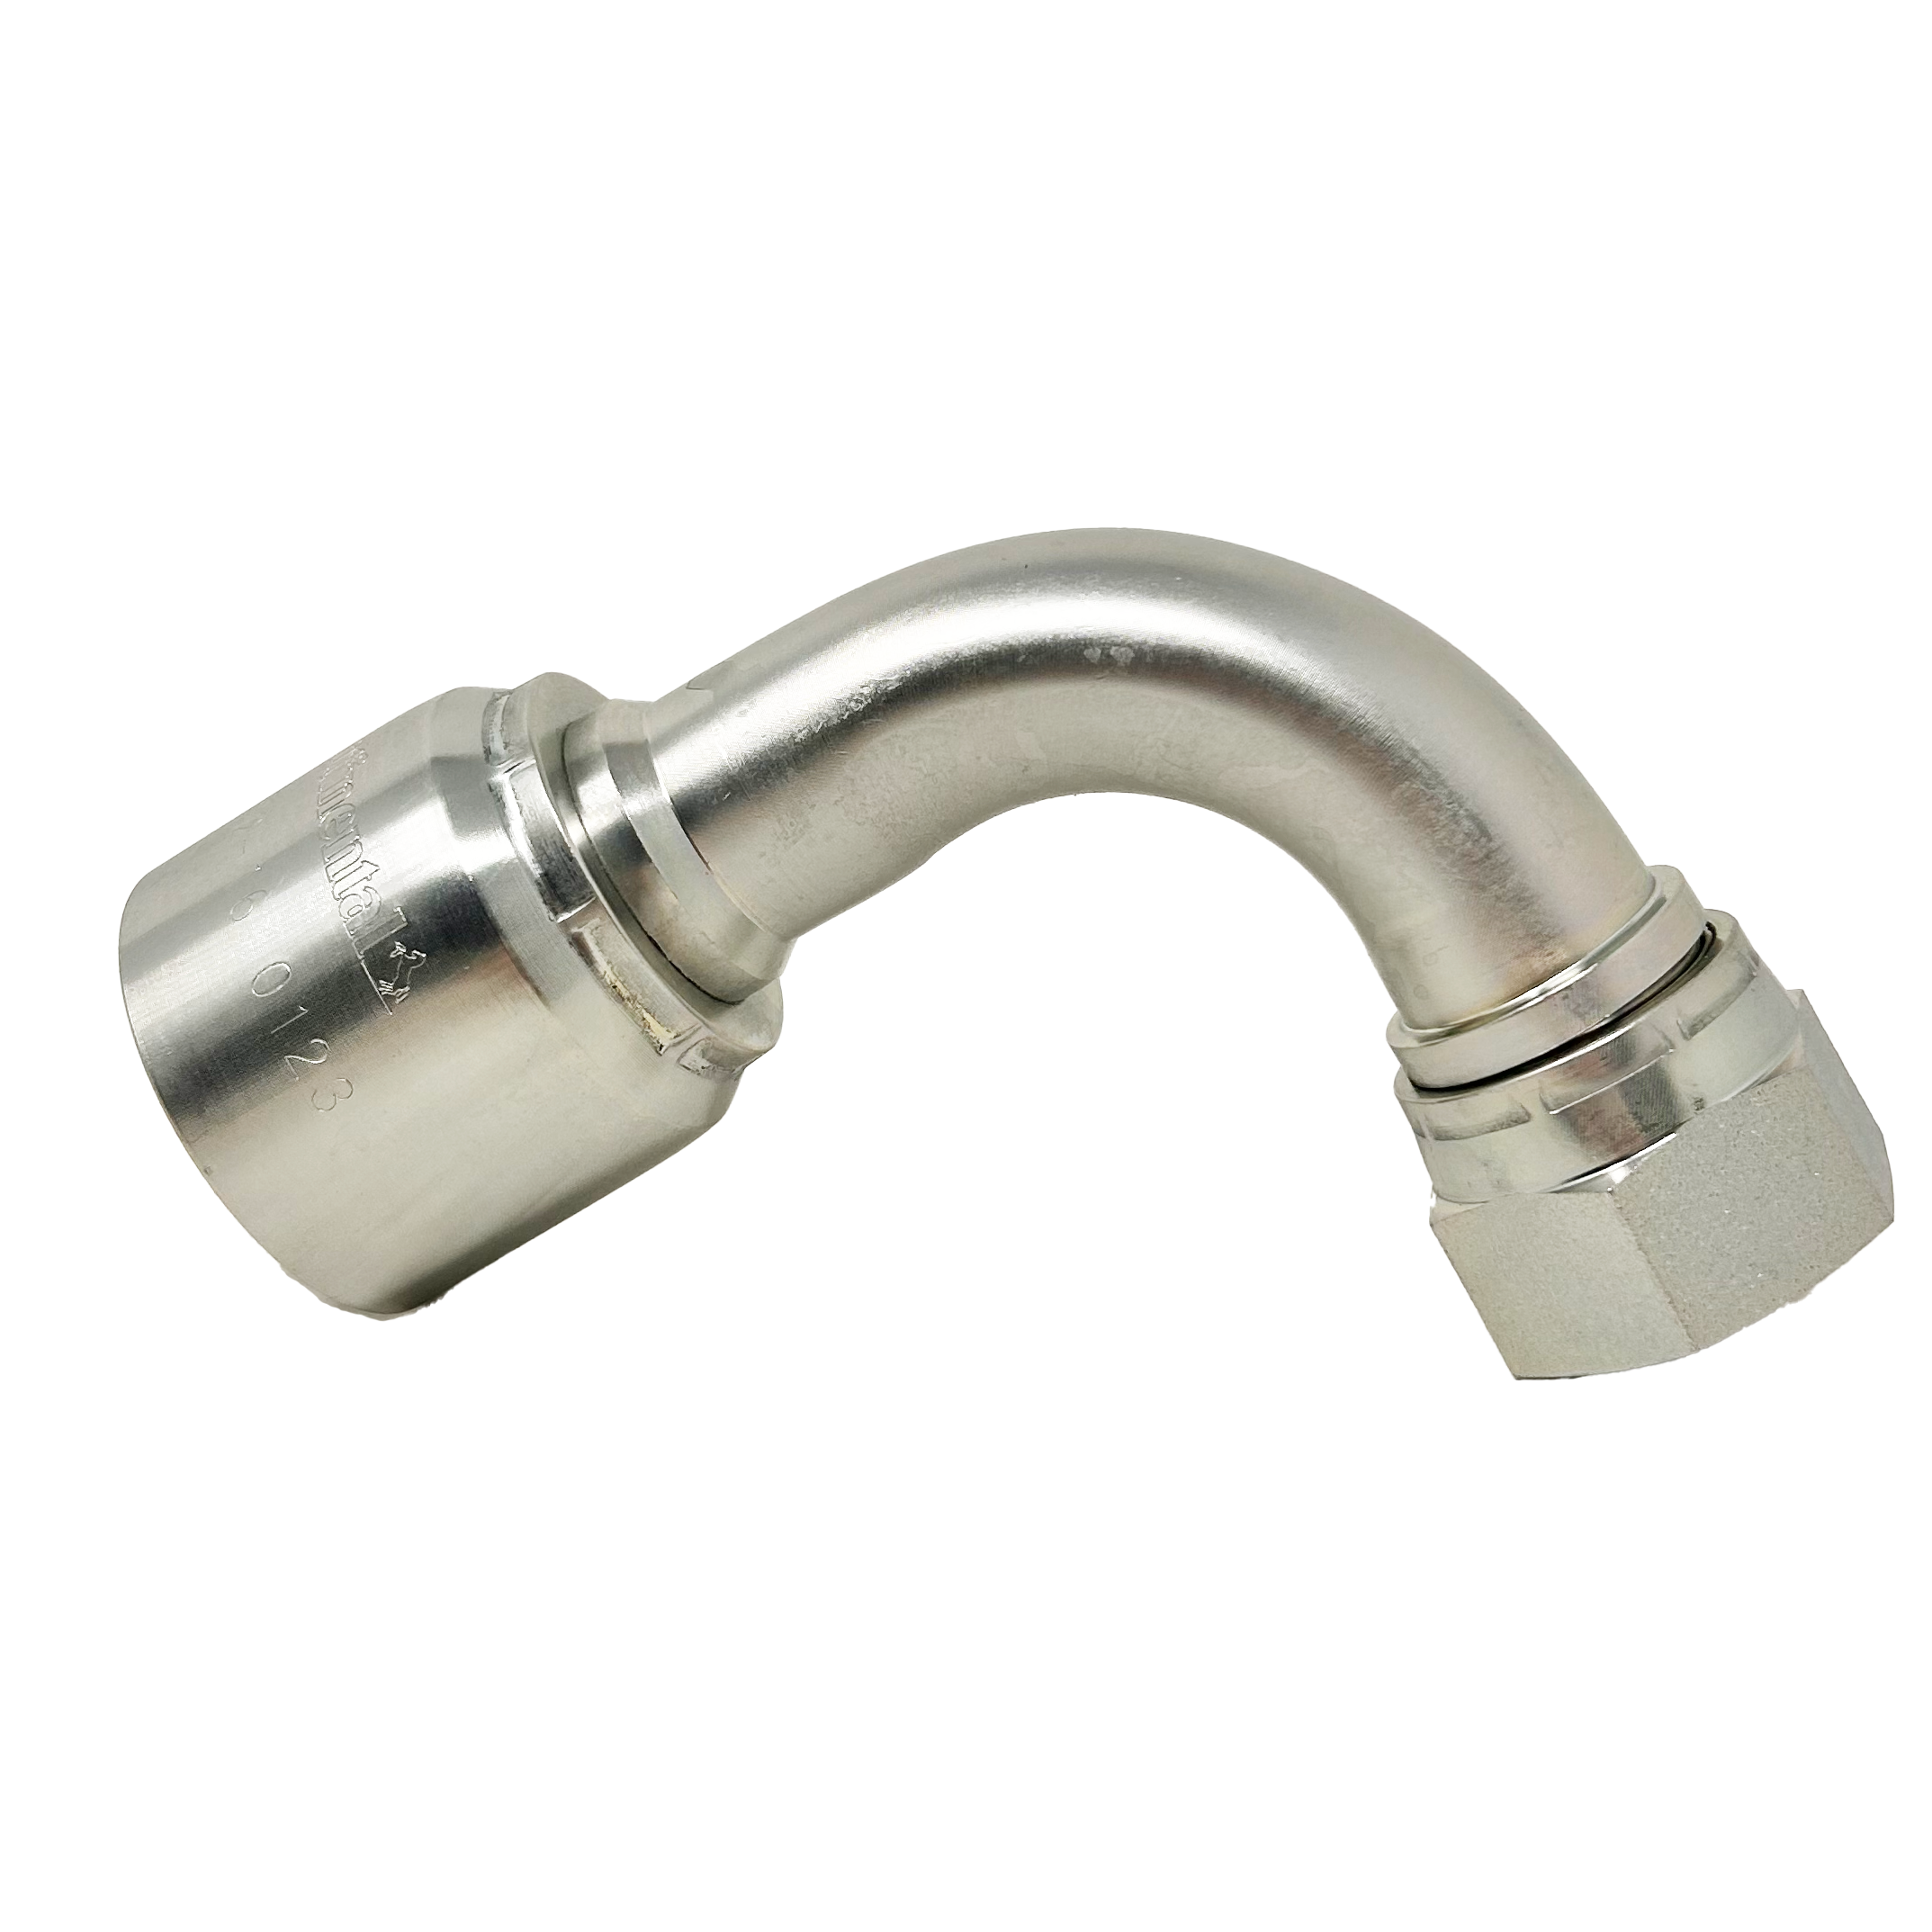 B2-JCFX90-1012: Continental Hose Fitting, 0.625 (5/8") Hose ID x 1-1/16-12 Female JIC, 90-Degree Swivel Connection